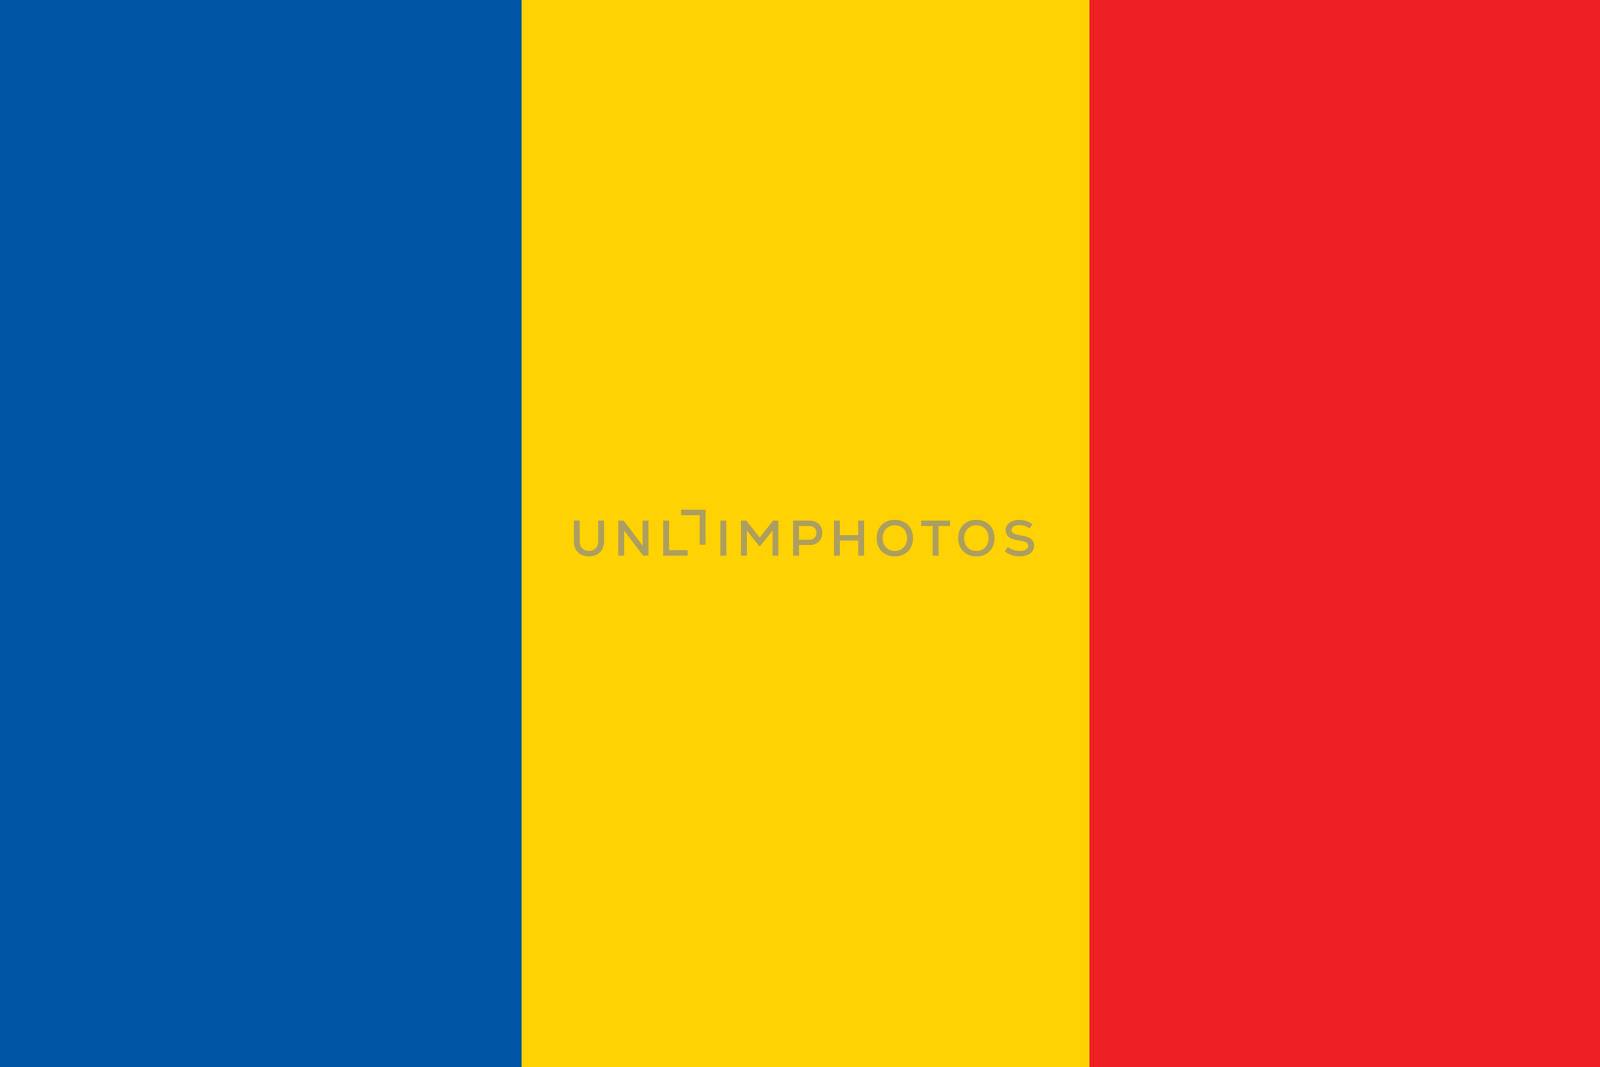 An Illustrated Drawing of the flag of Chad